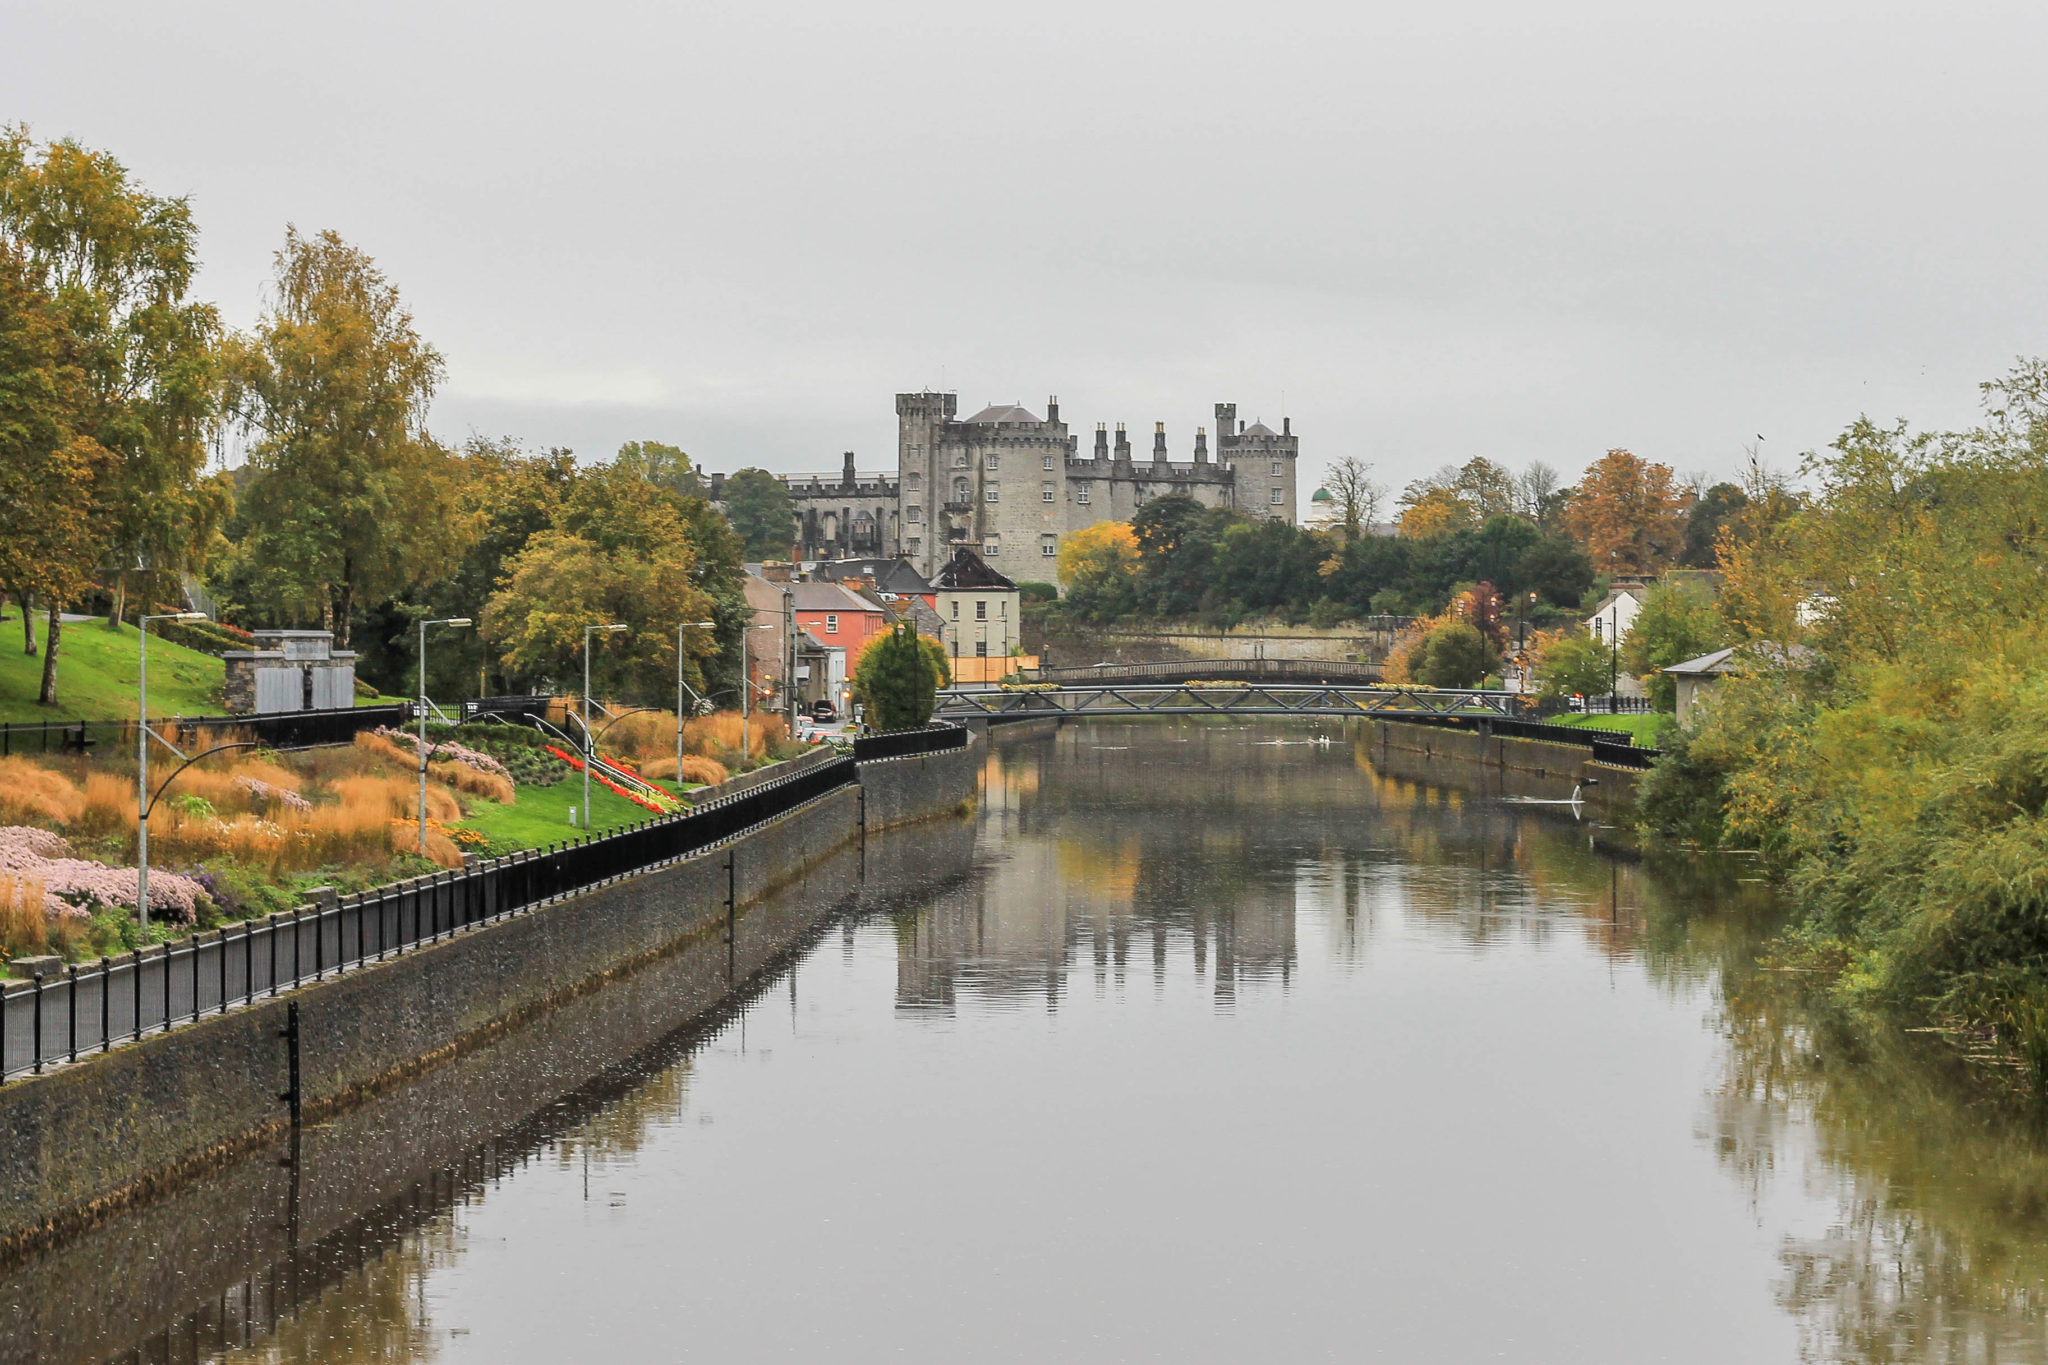 River Nore with the Kilkenny Castle behind it, Ireland